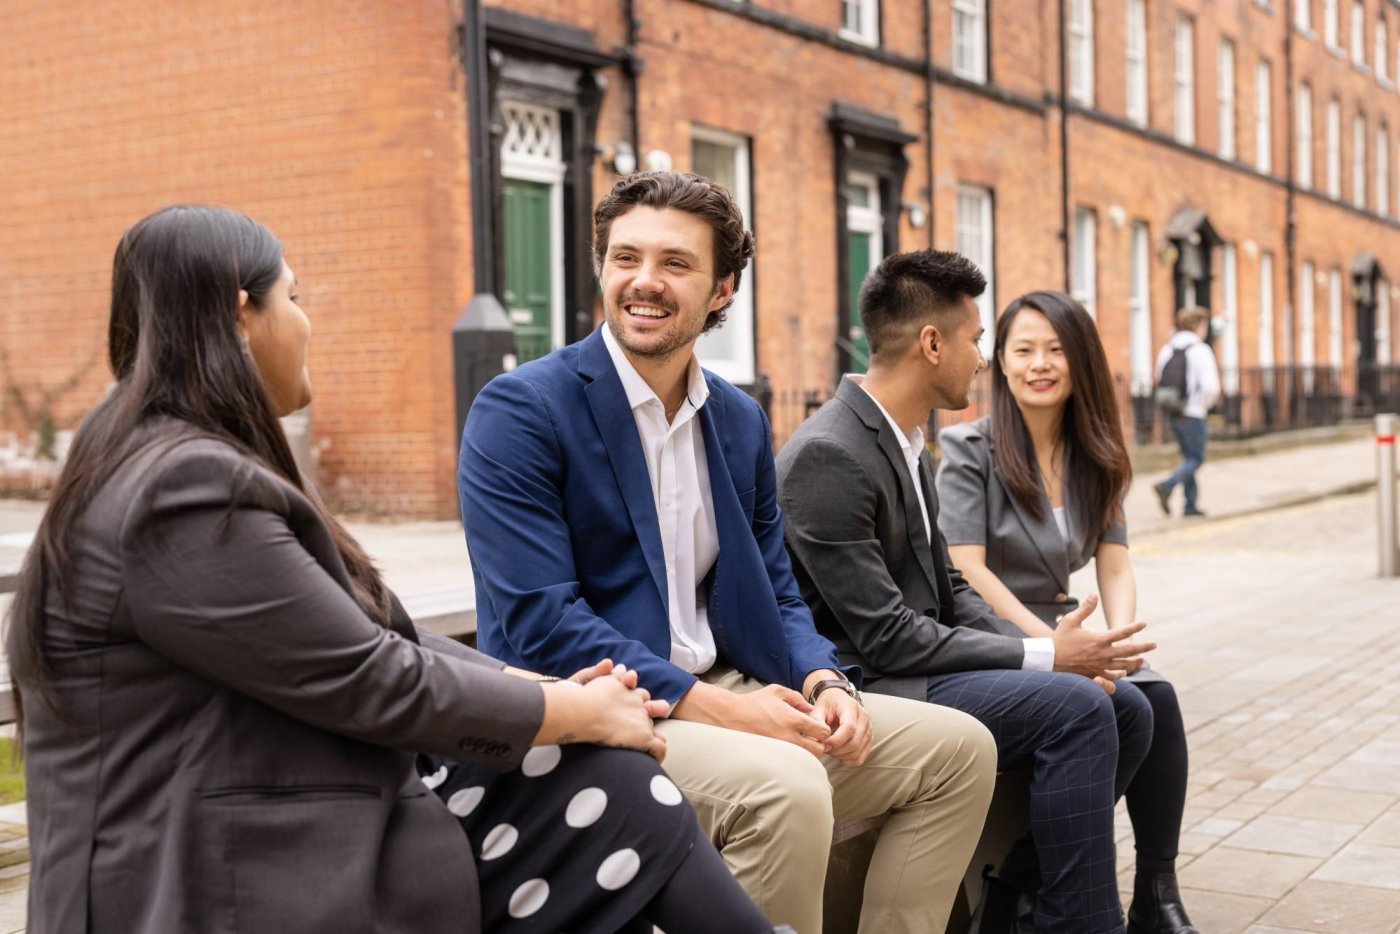 A group of MBA students sit on a bench in front of a red brick building.